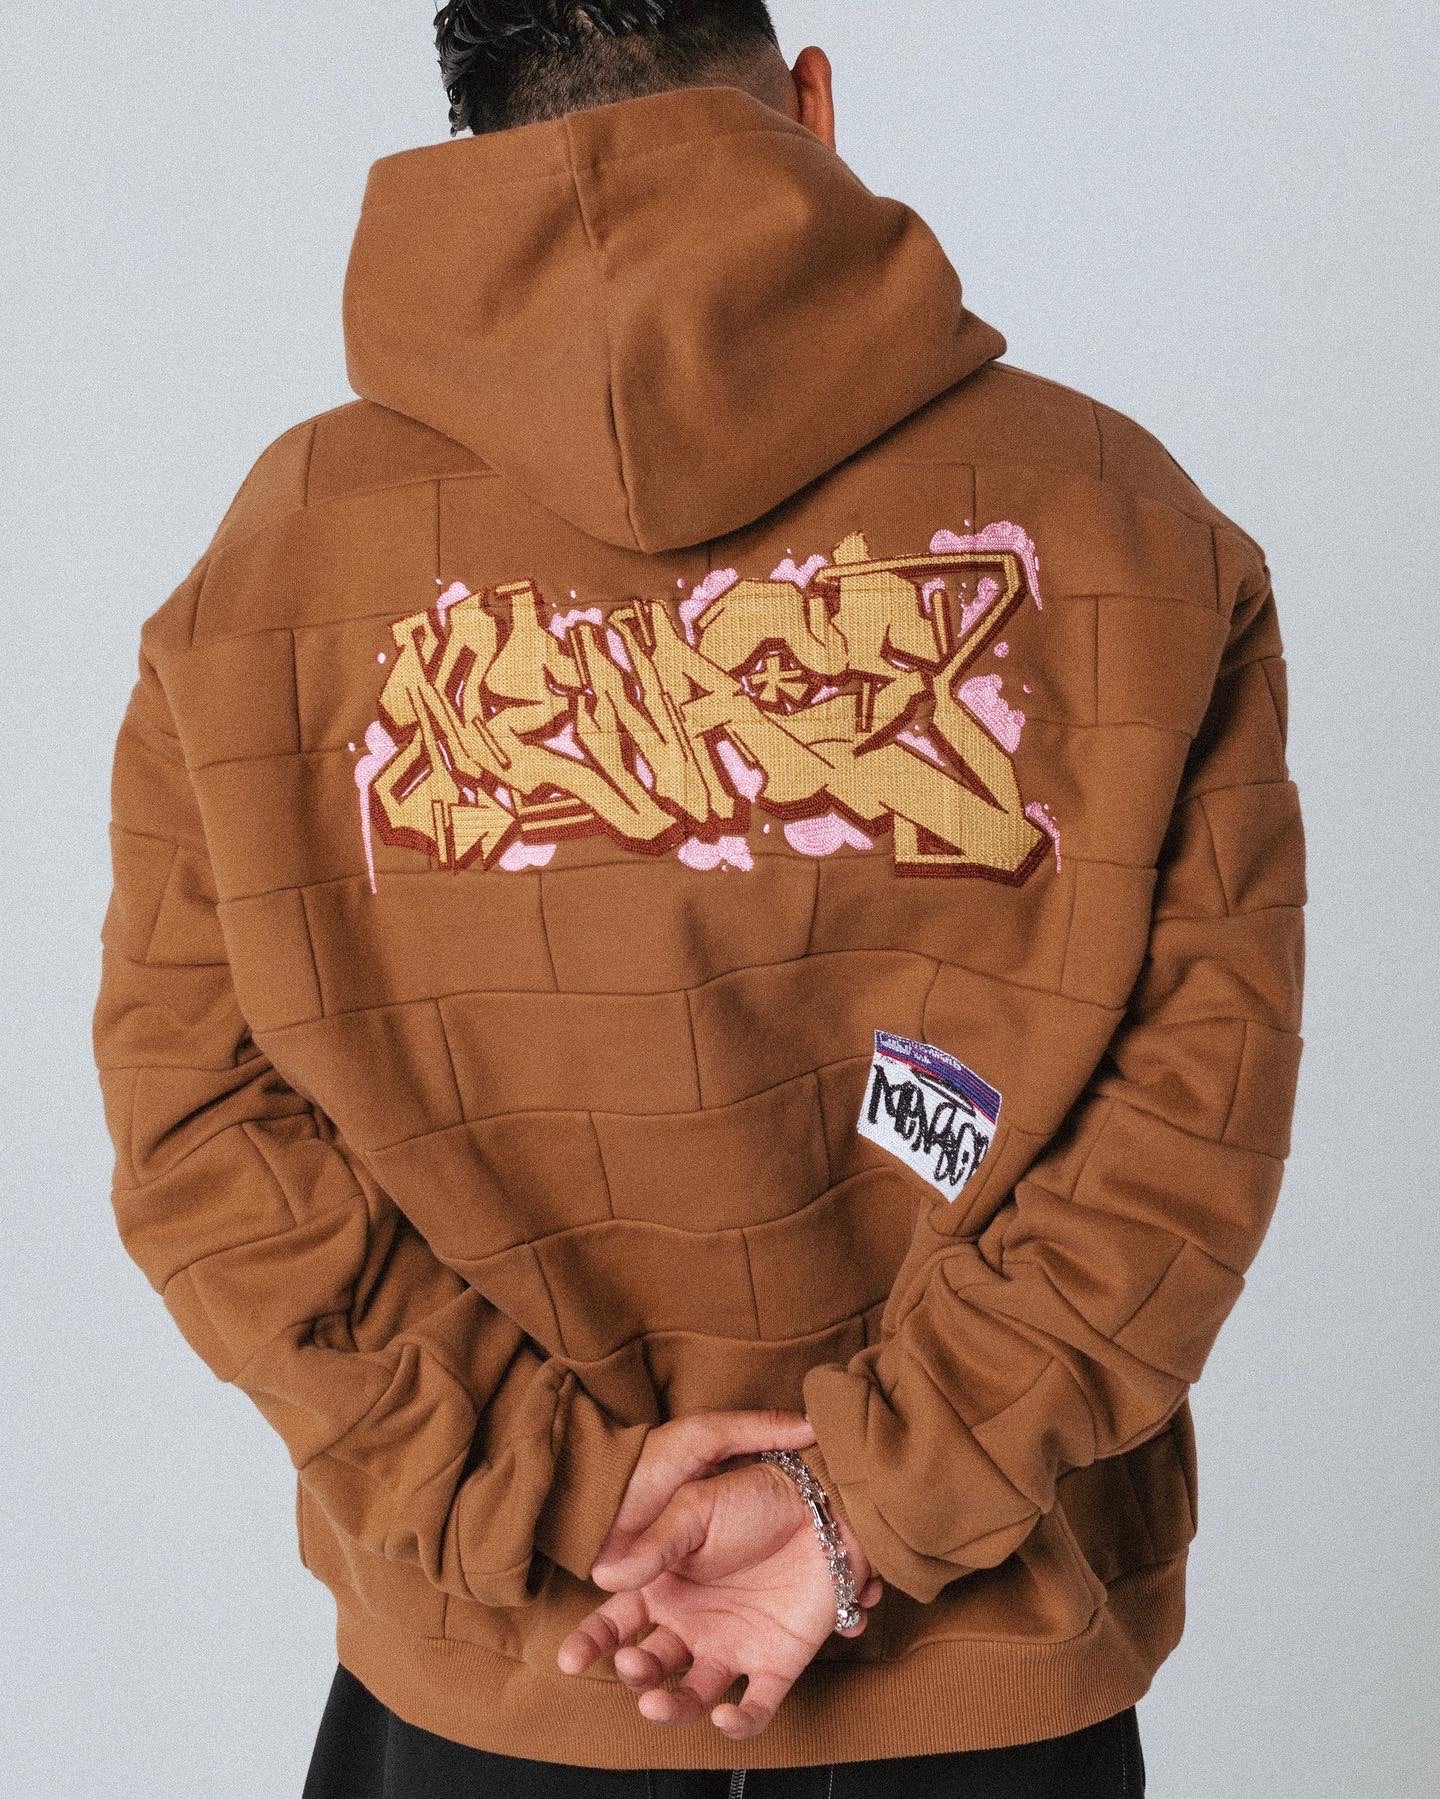 EMBROIDERED "BRICK ALLEY-WALL" GRAFFITI HOODIE